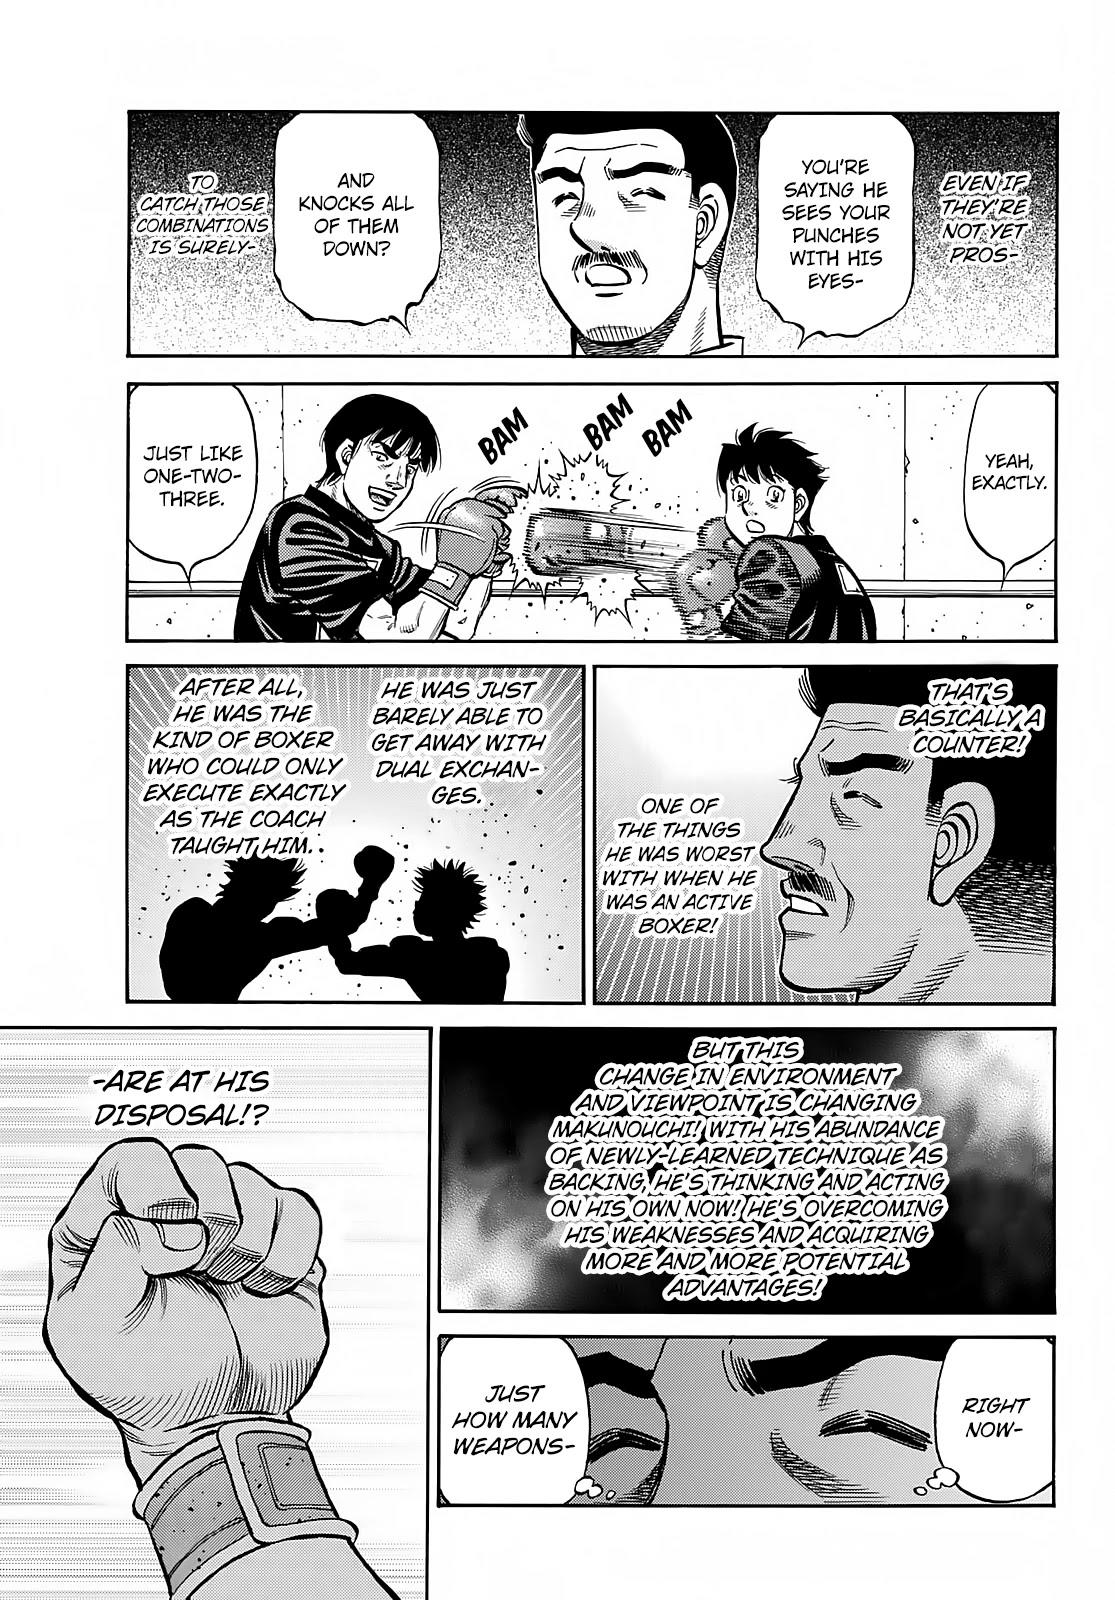 When Ippo comes back, I hope this is one of his fights on his road to  Ricardo : r/hajimenoippo